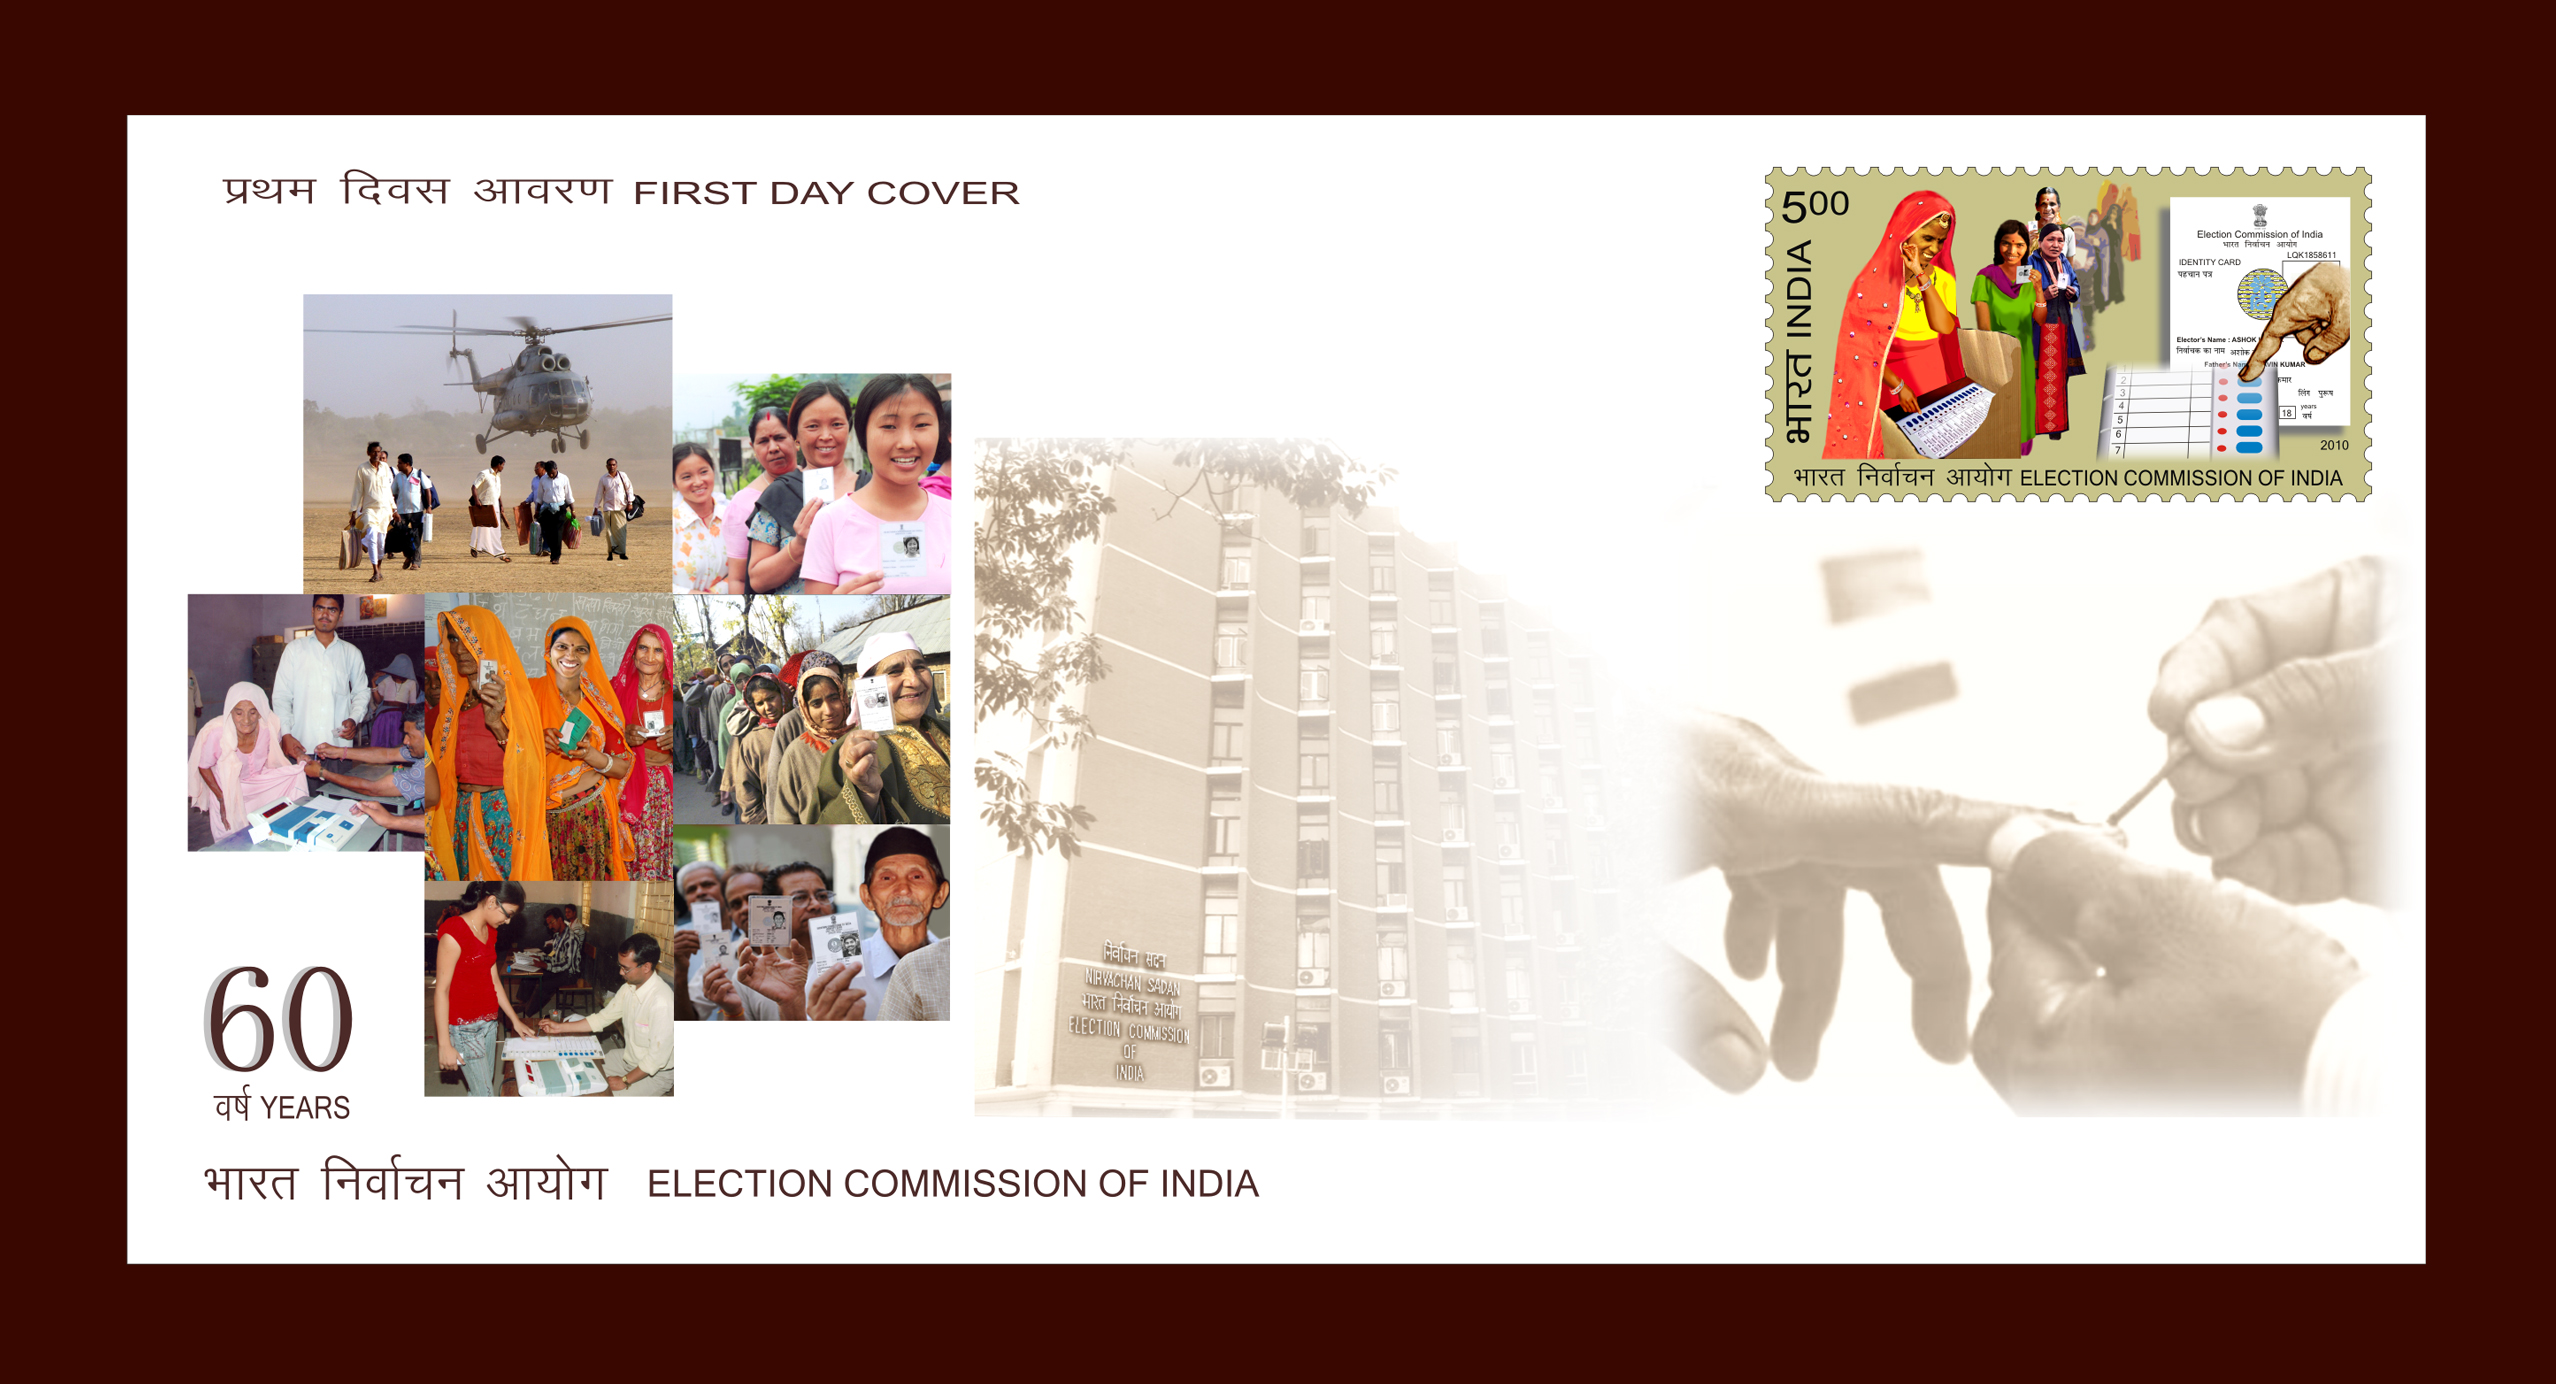 A Commemorative First Day Cover and Stamp released to mark the 60th Anniversary of the Election Commission of India.